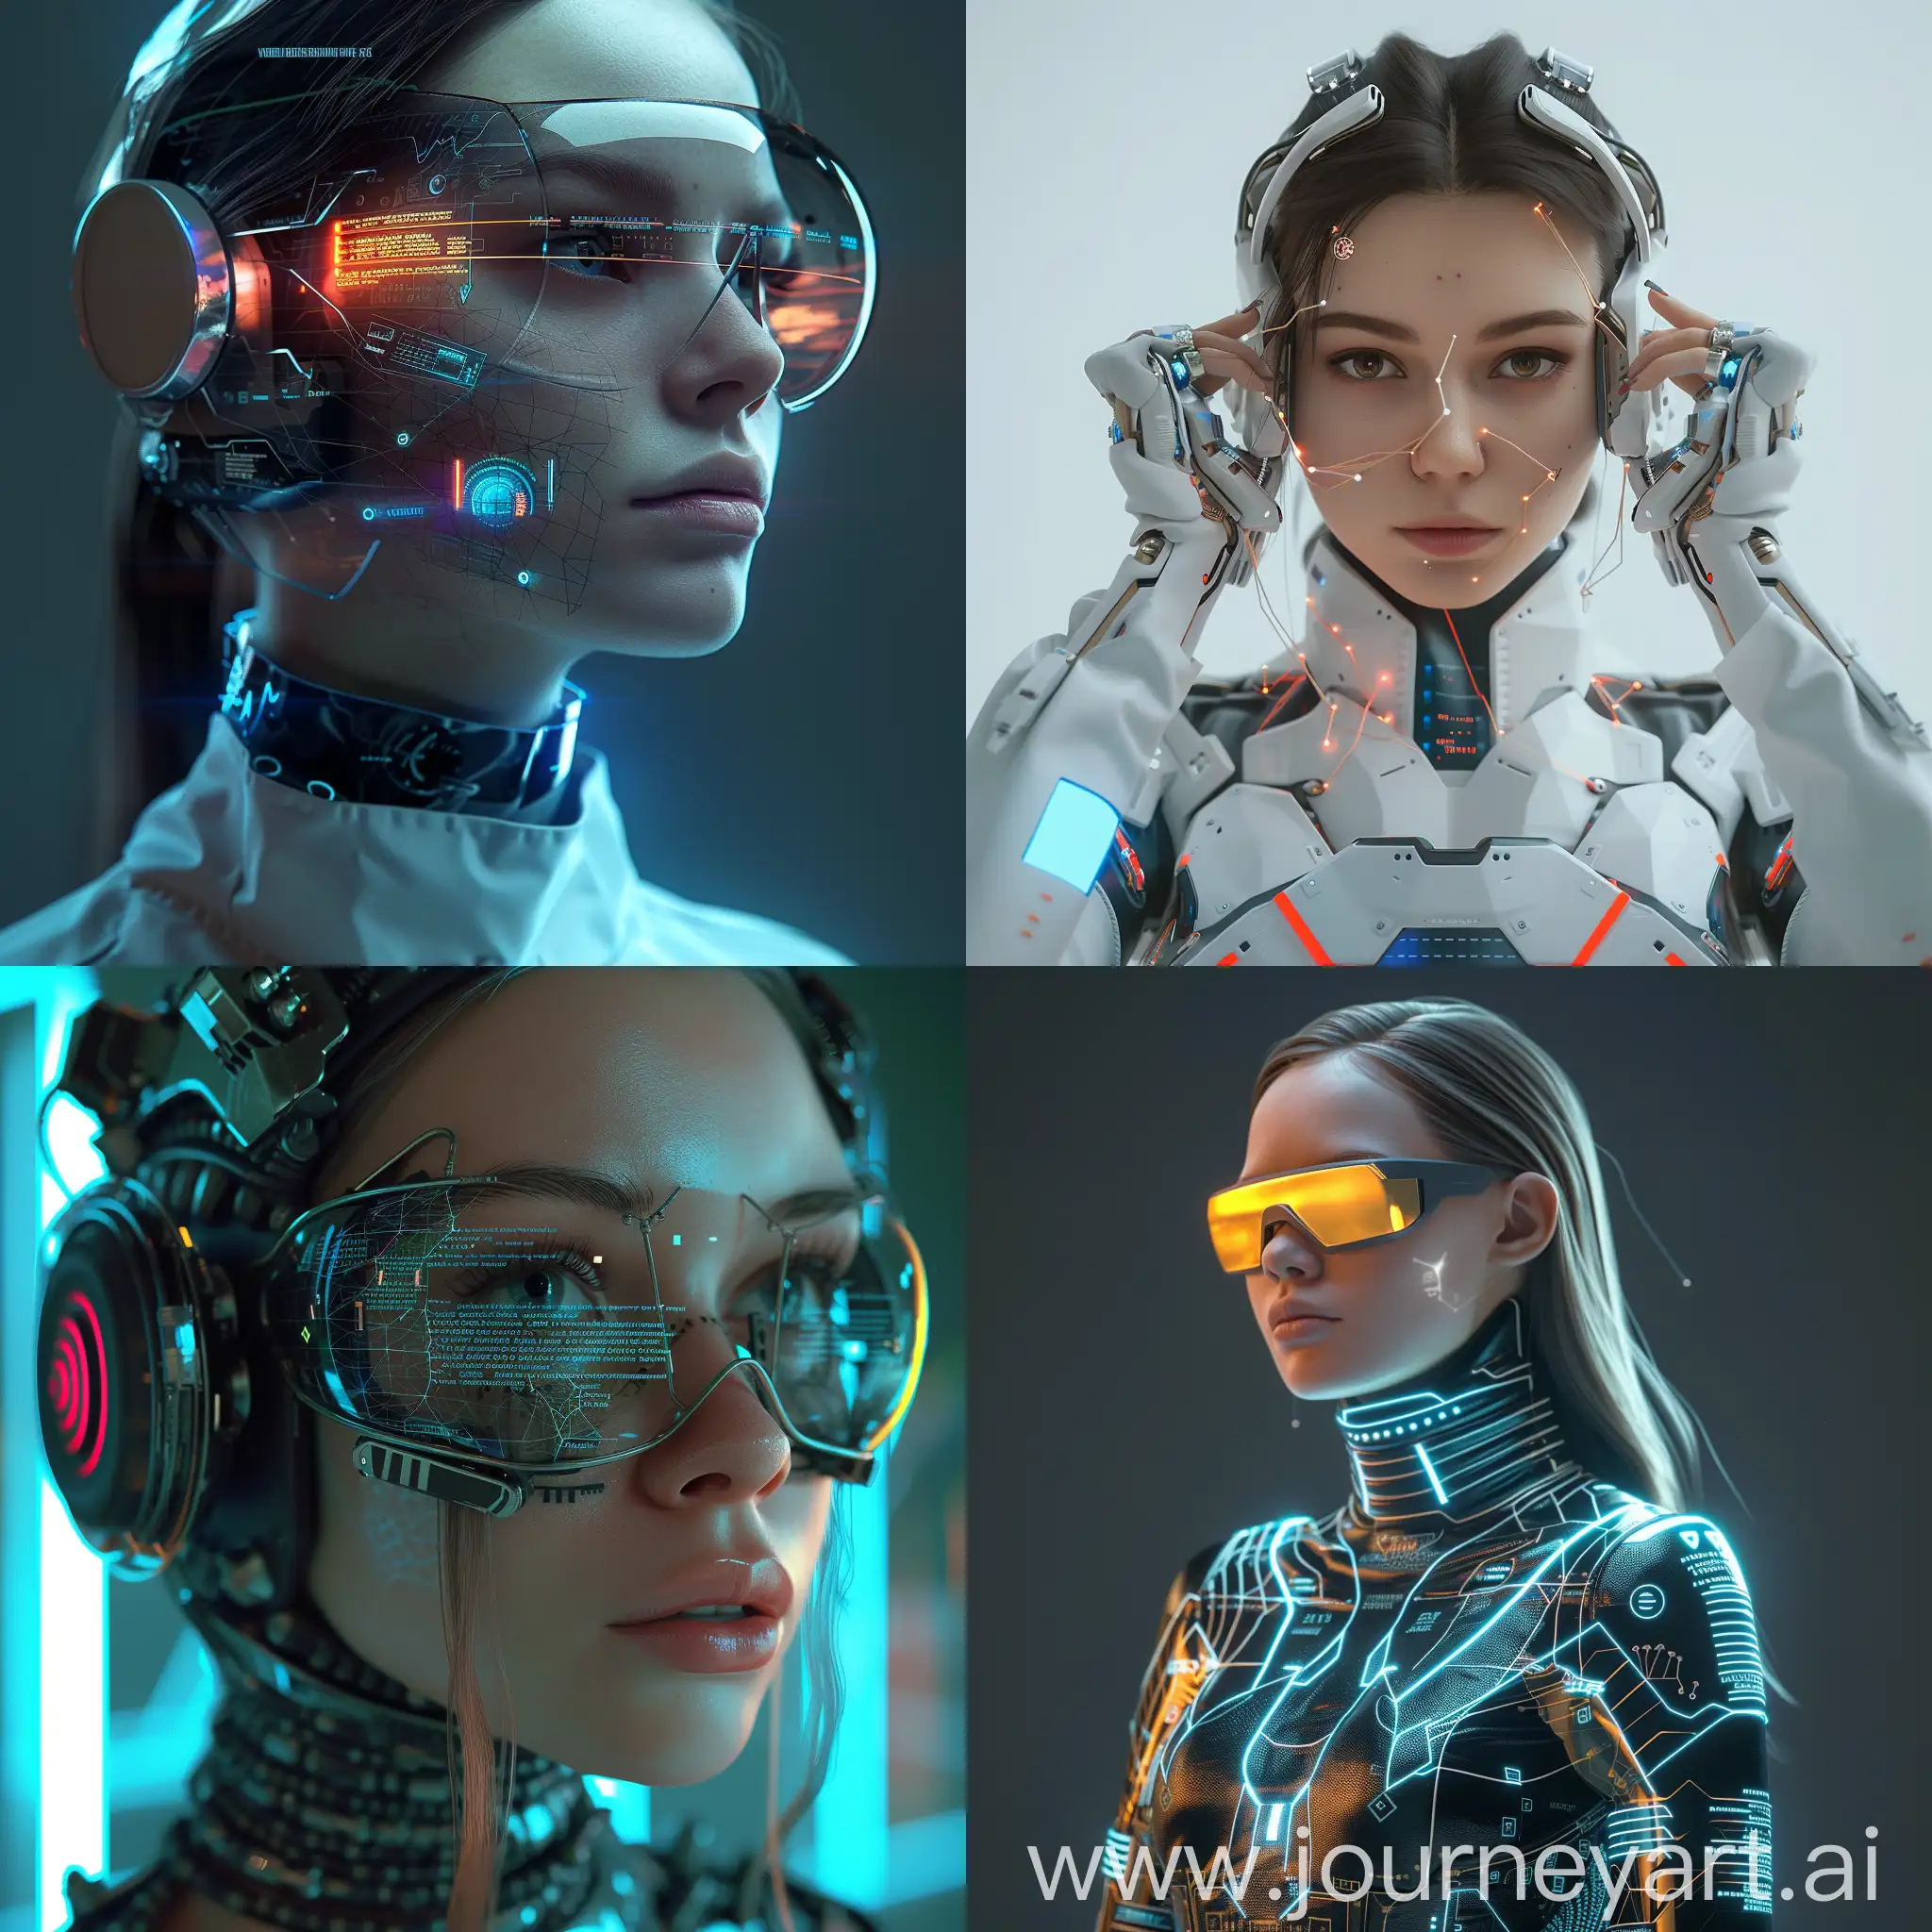 Futuristic-Russian-Girl-with-Advanced-Neural-Enhancement-and-Cybernetic-Enhancements